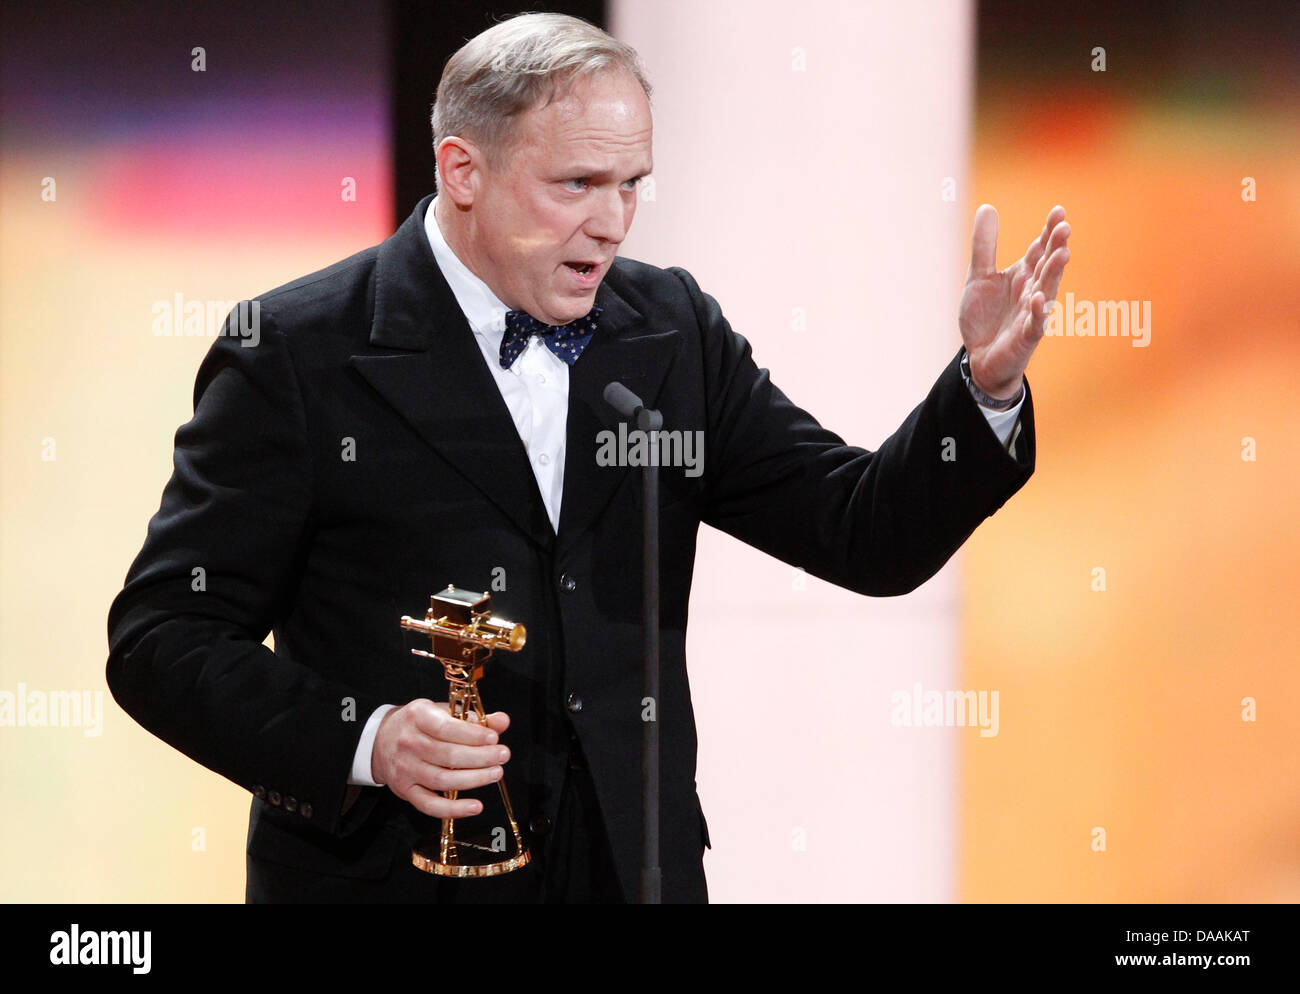 German actor Ulrich Tukur holds his trophy for best German actor during the 46th Golden Camera award ceremony in Berlin, Germany, 5 February 2011. The award honours the audience's favourites from film, television, sports and media. Photo: Tobias Schwarz dpa/lbn Stock Photo